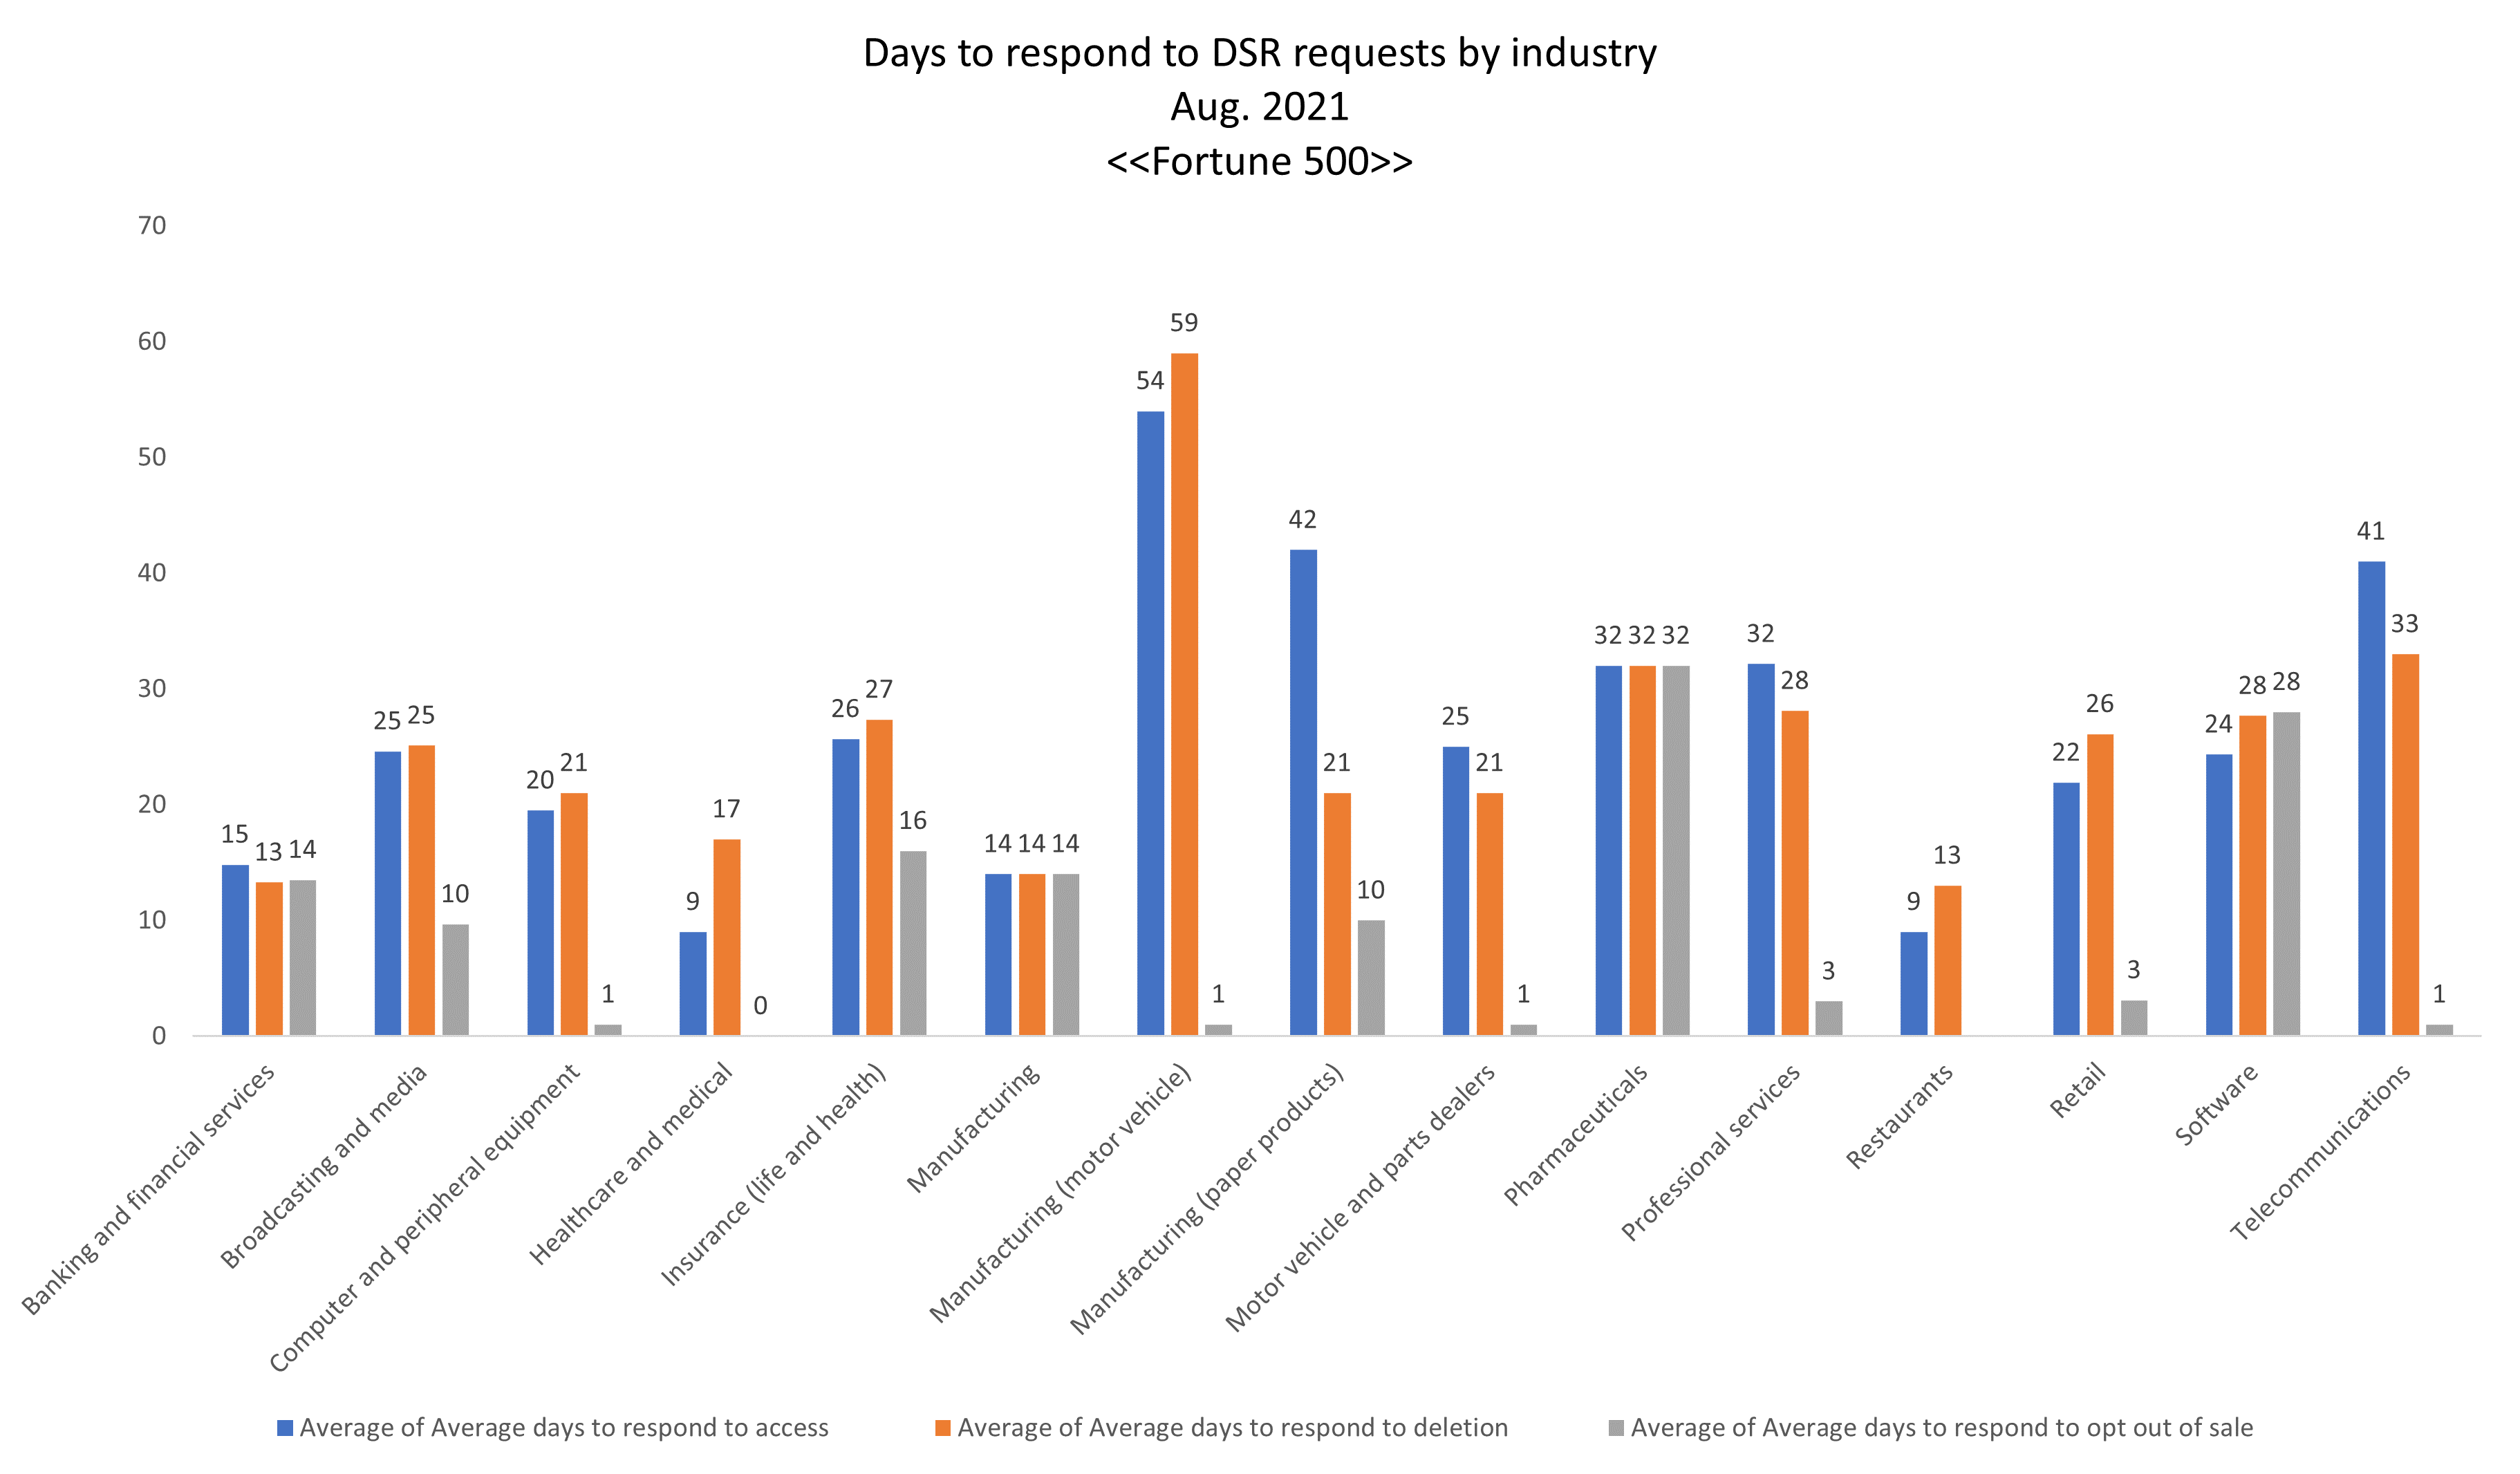 Days to respond to DSR requests by industry